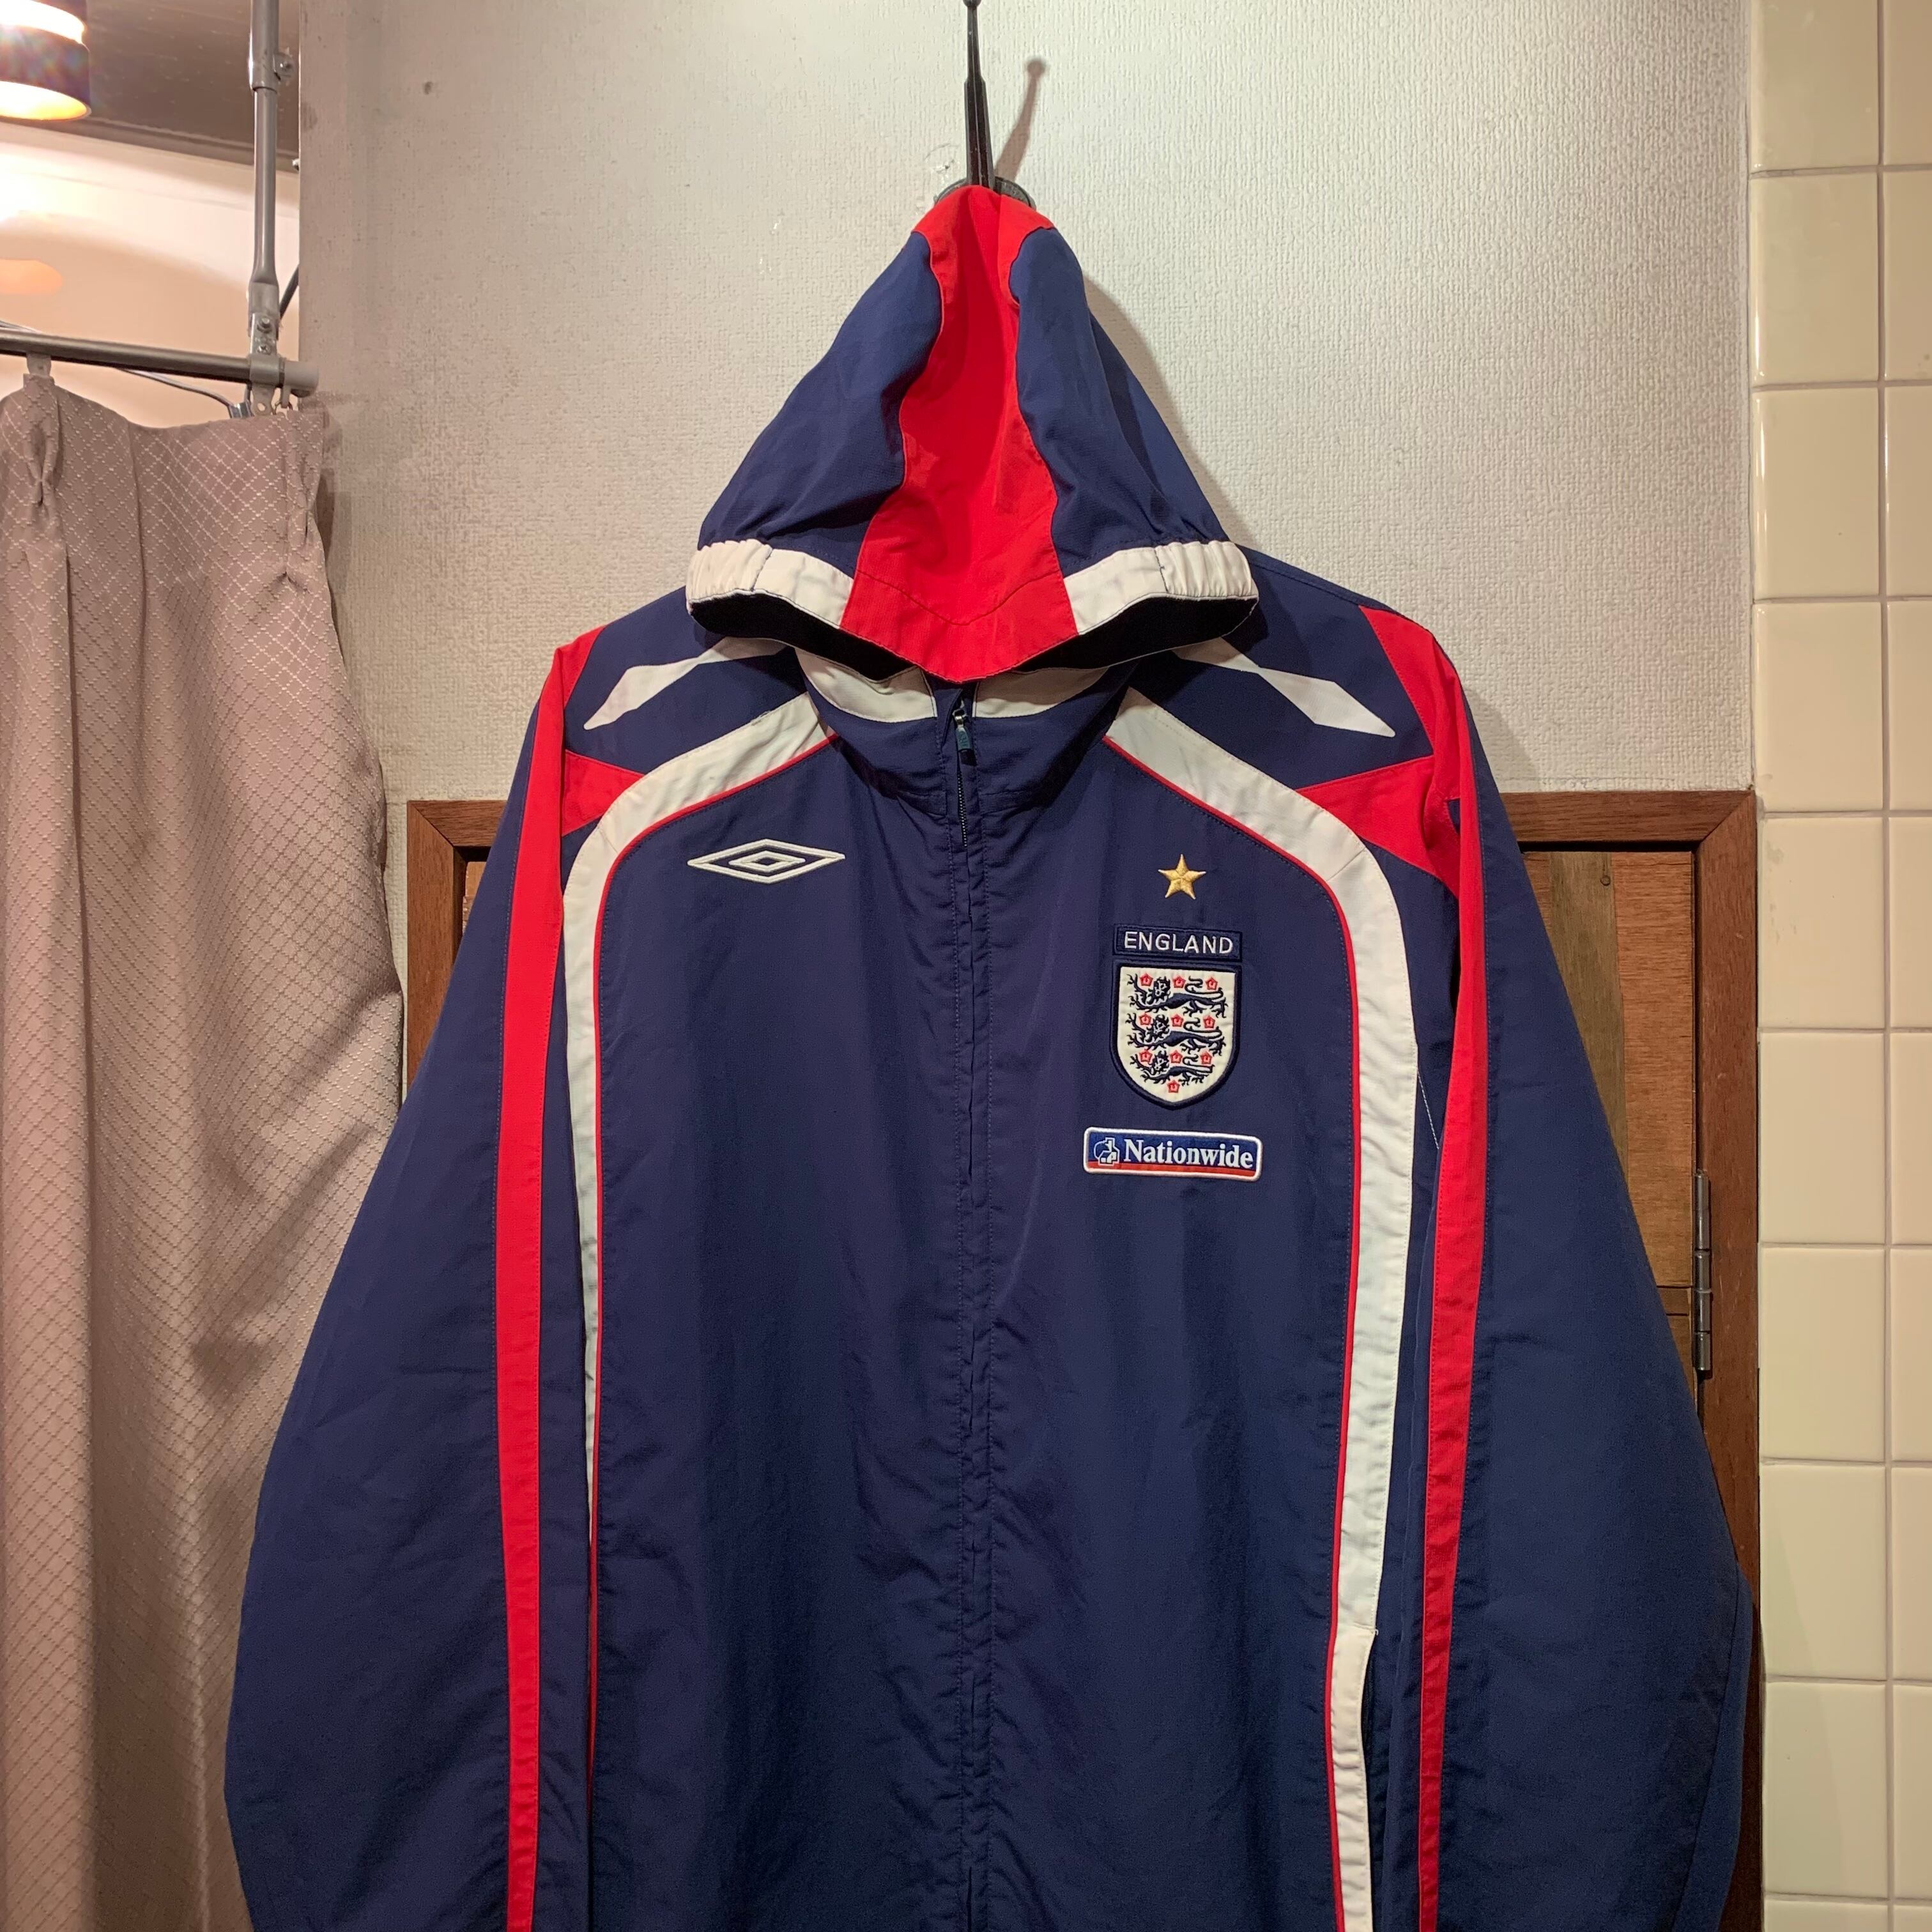 “UMBRO” 00’s「ENGLAND」 navy×red×white polyester zip-up hooded jacket